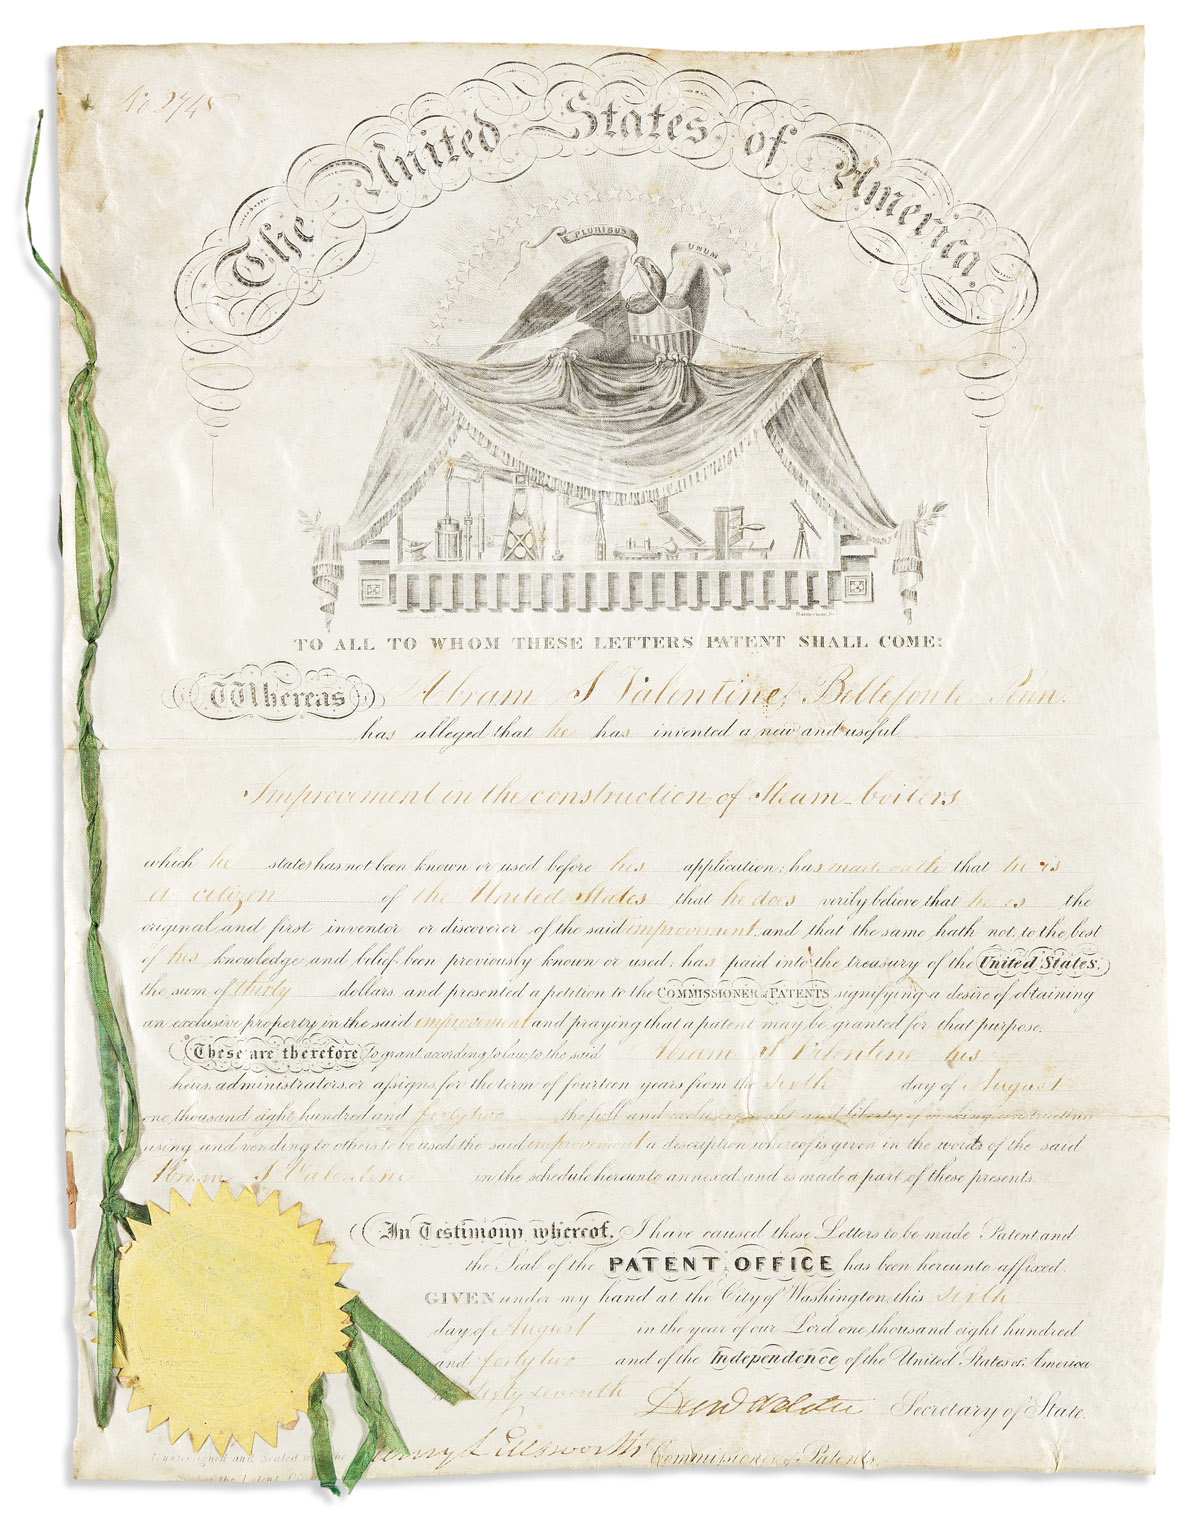 WEBSTER, DANIEL. Partly-printed vellum Document Signed, as Secretary of State,